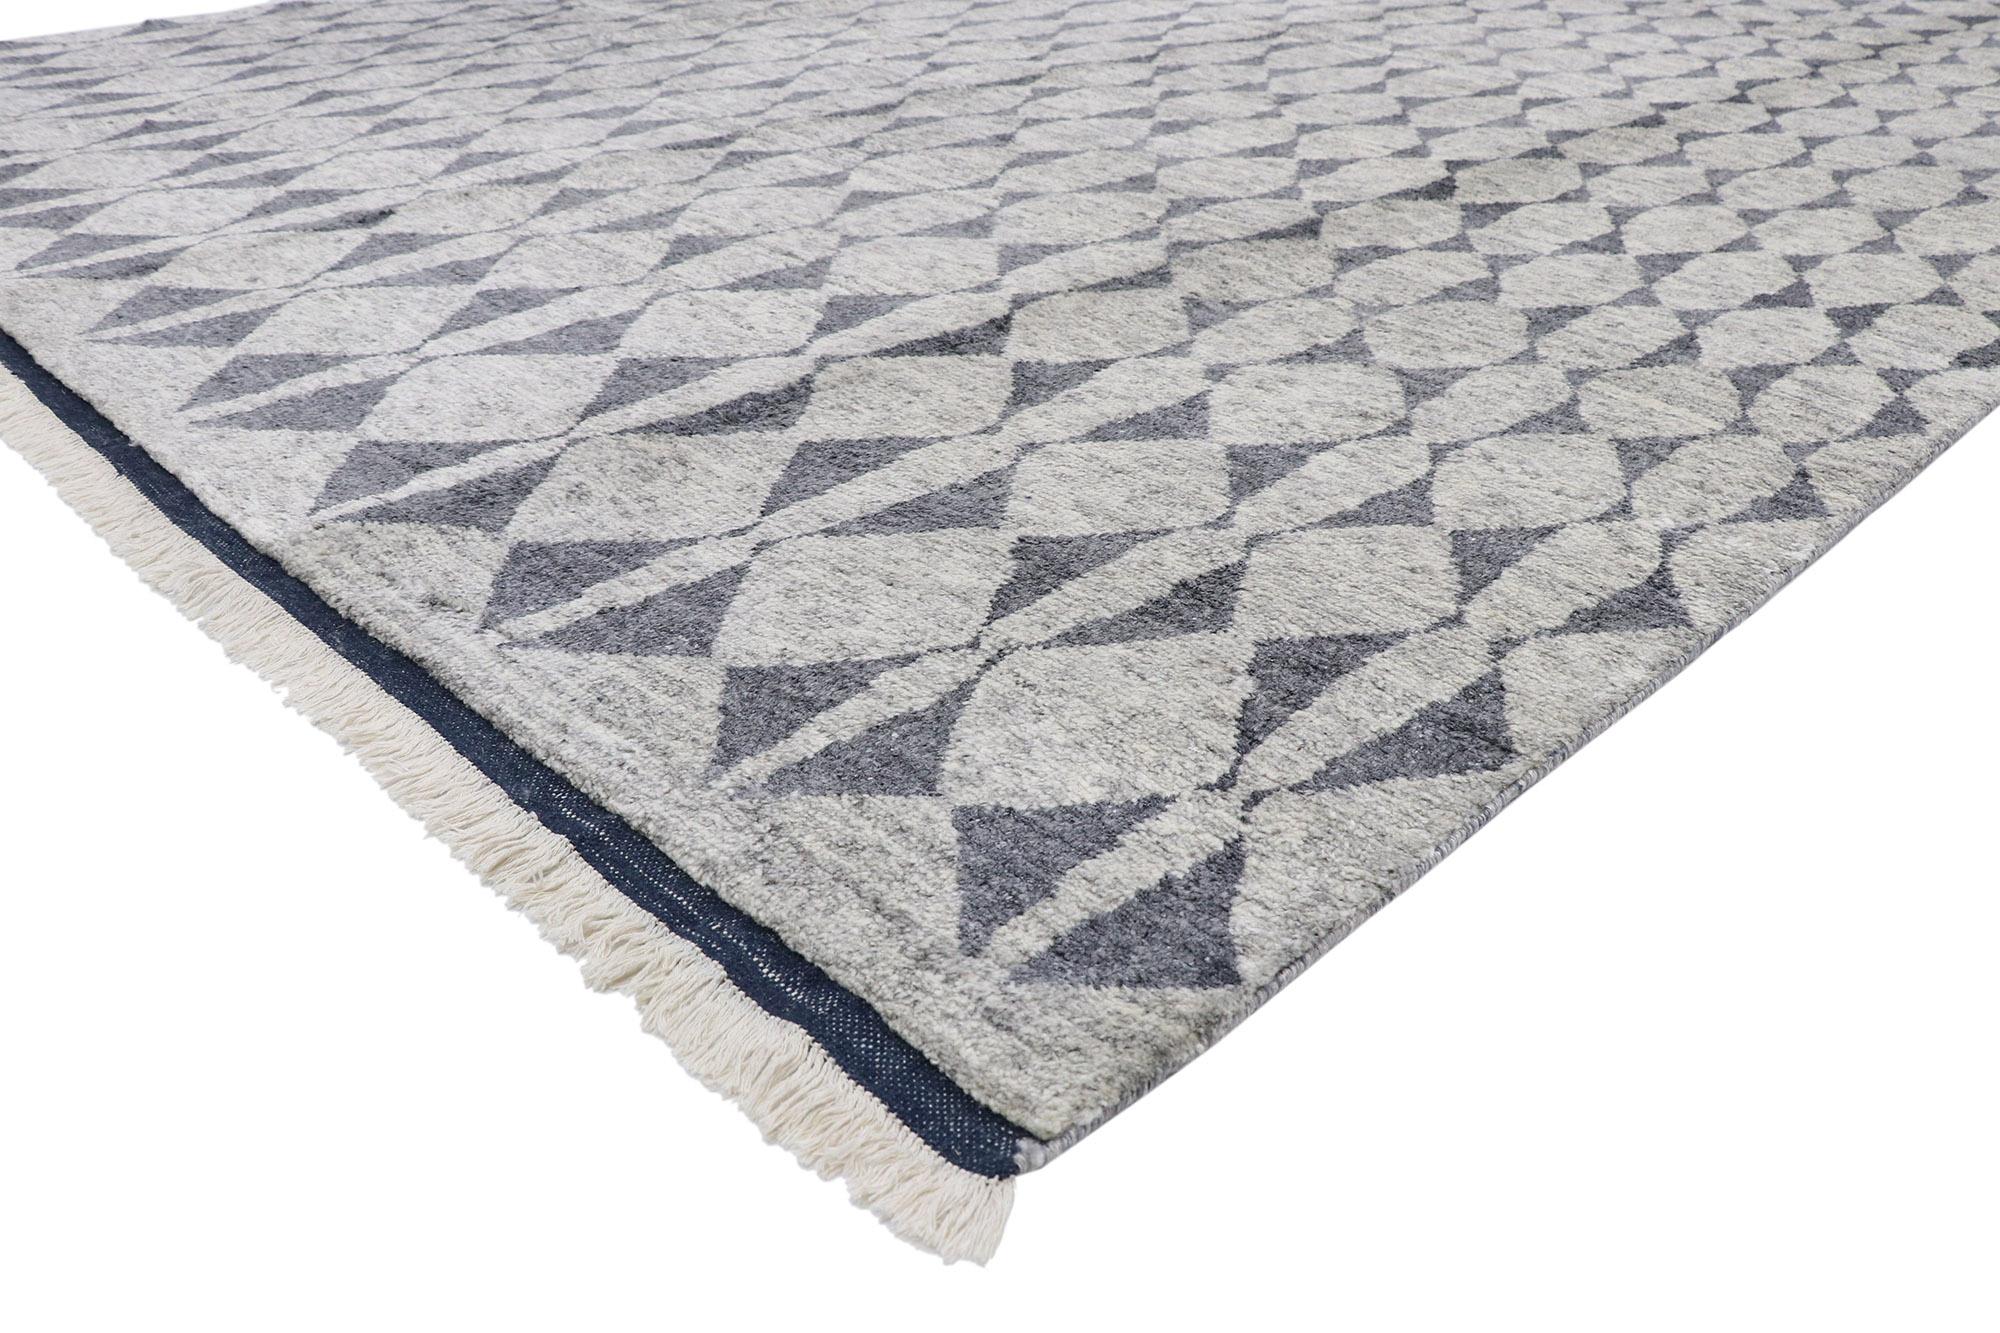 30354 New Contemporary Moroccan Area Rug with Scandi-Modern and New Nordic Style. This hand knotted wool contemporary Moroccan area rug with New Nordic Style features an all-over triangle pattern. The triangles unite forming a lozenge diamond